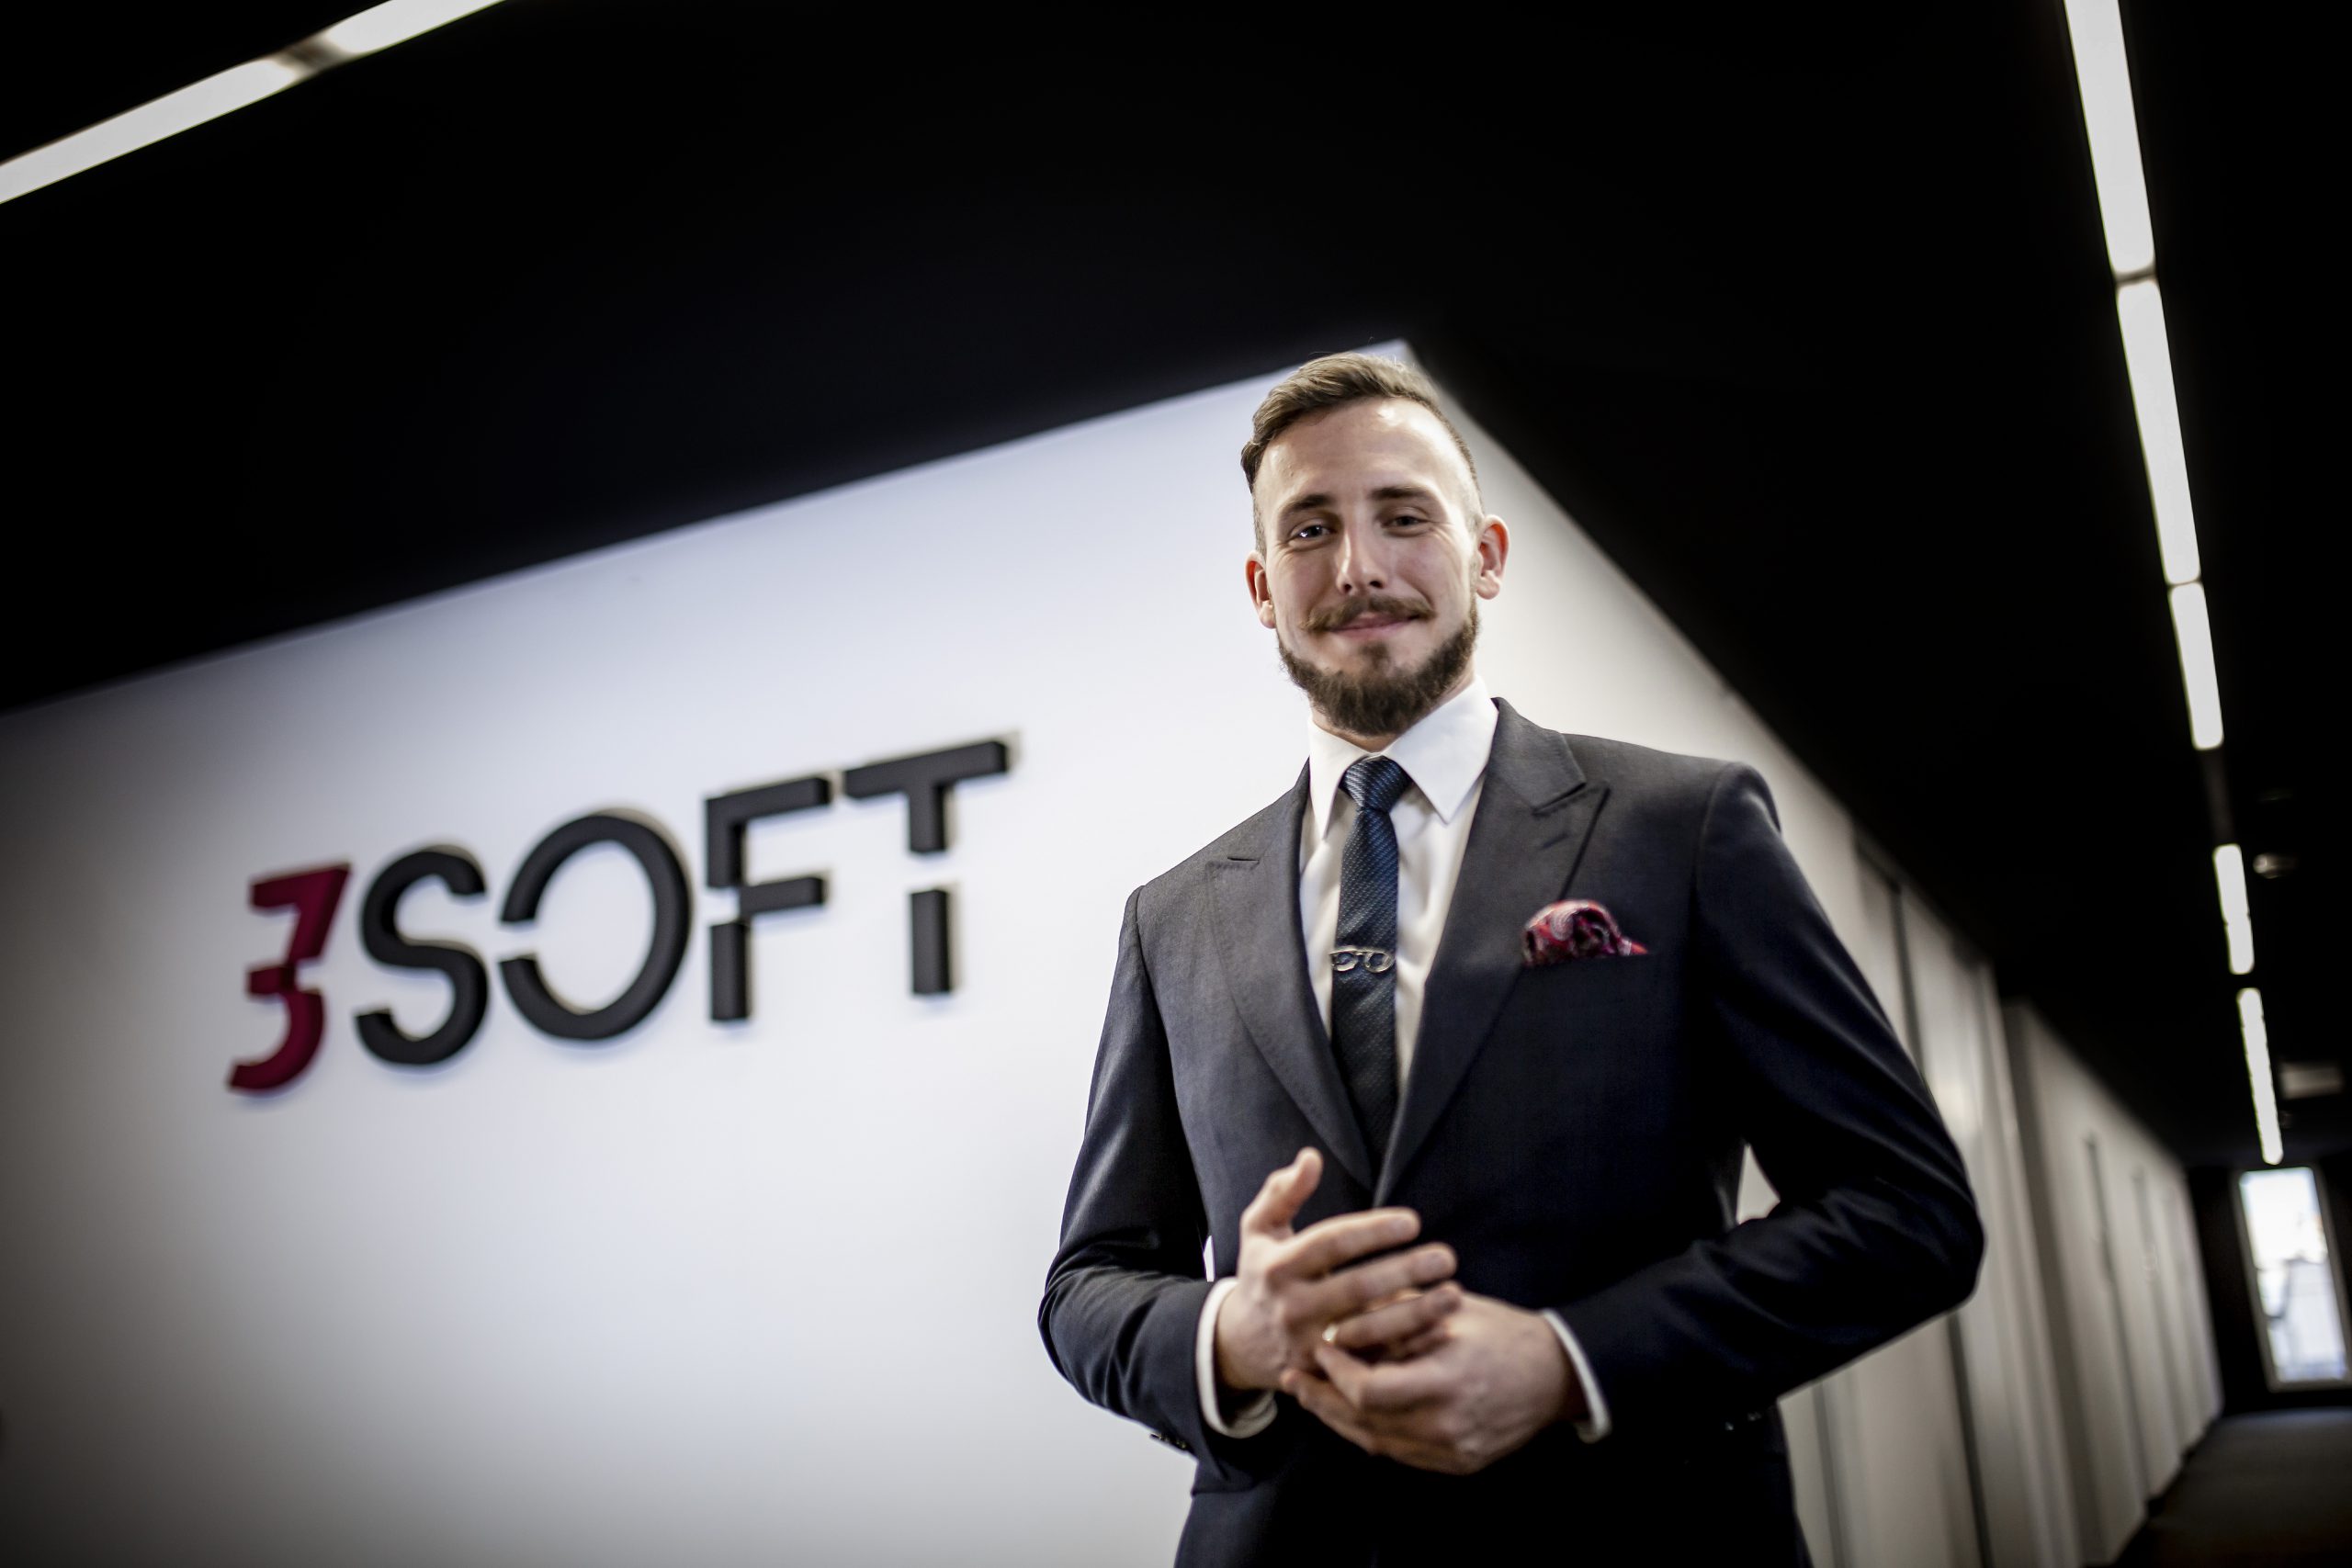 Chief Strategy Officer – Kamil Folkert’s new role at 3Soft